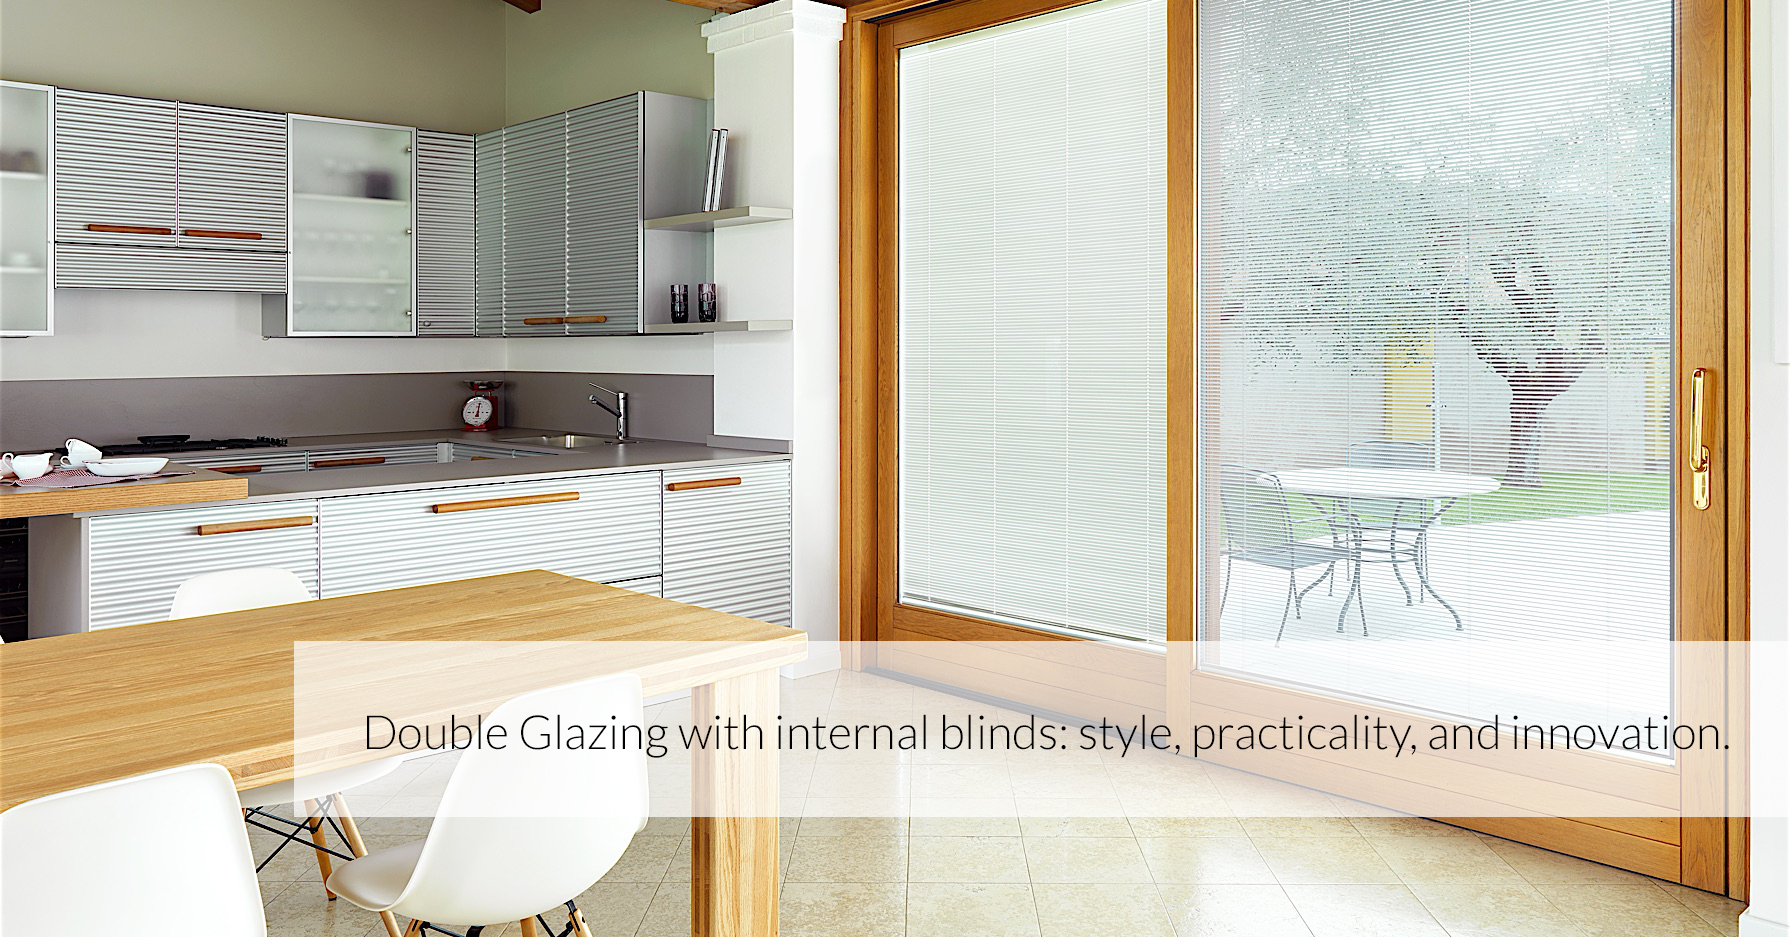 Double Glazing with internal blinds: style, practicality, and innovation